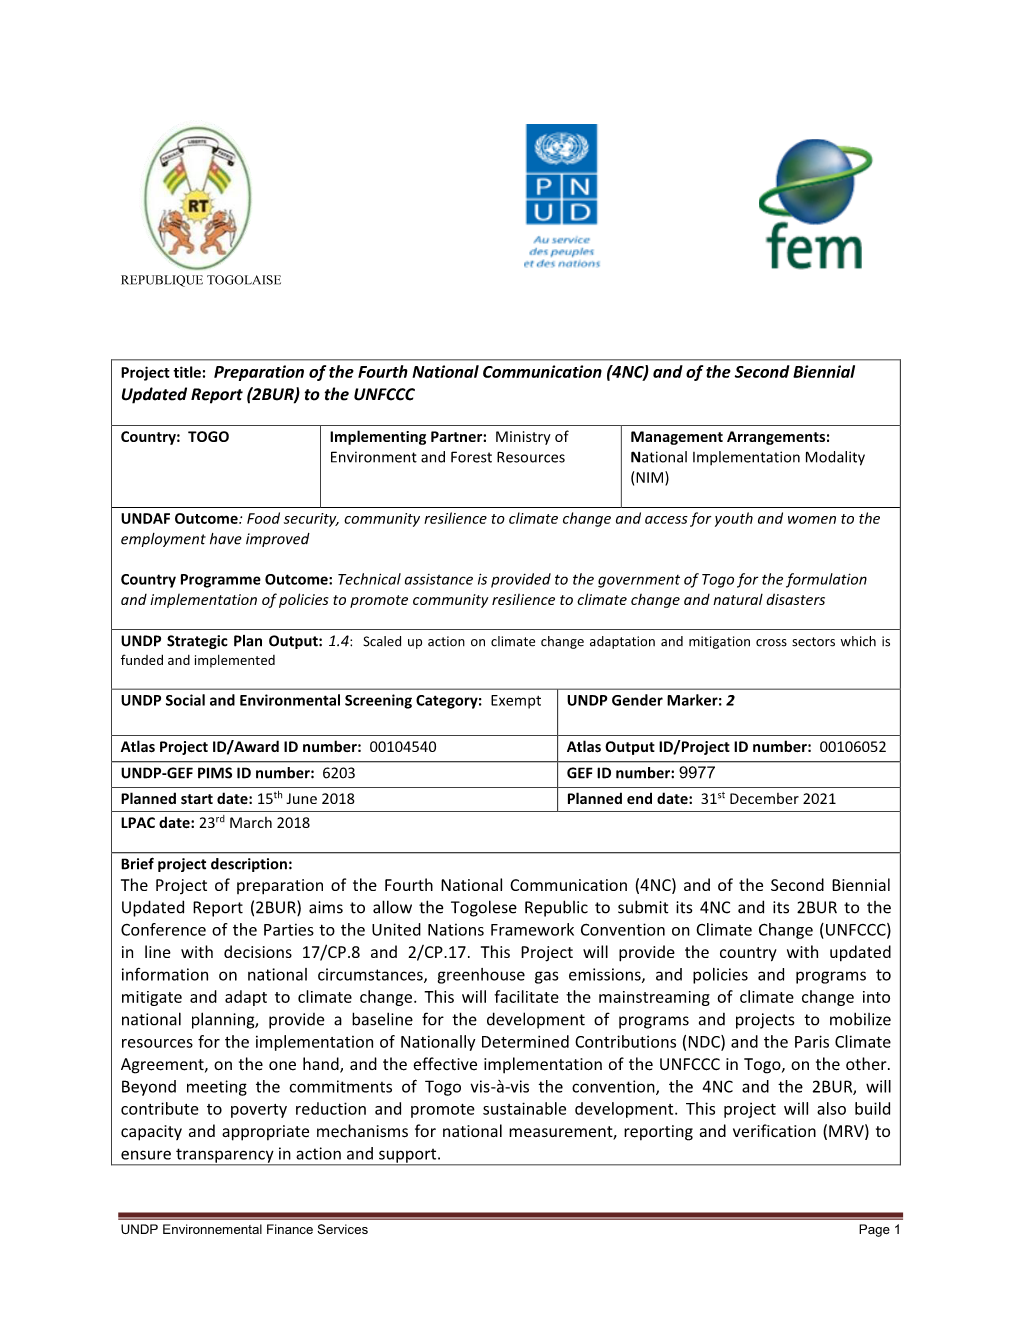 Project Document Is Submitted to the GEF for Final Approval